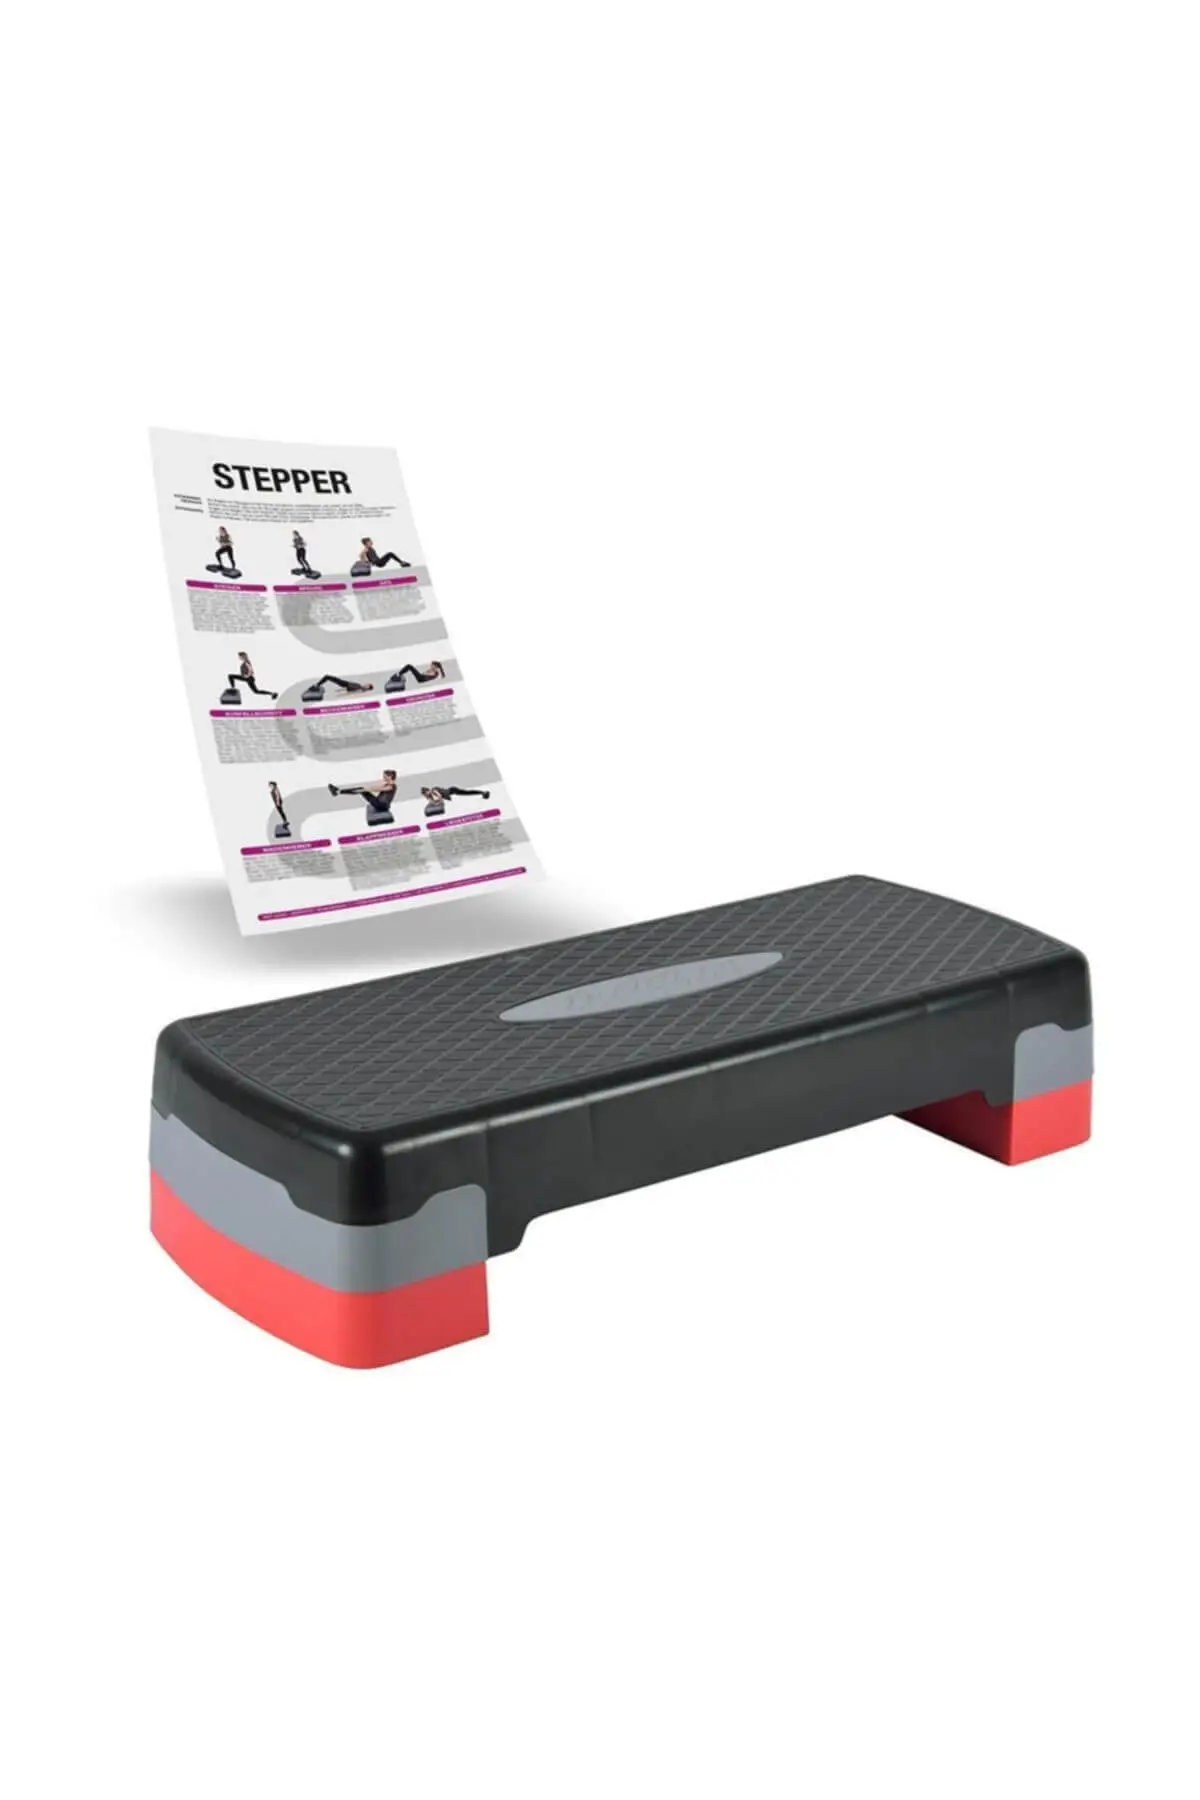 Delta  Elite Step Board-Two-Stage Step   Fitness  Exercise Tool Fitness Women Man For Home Spor